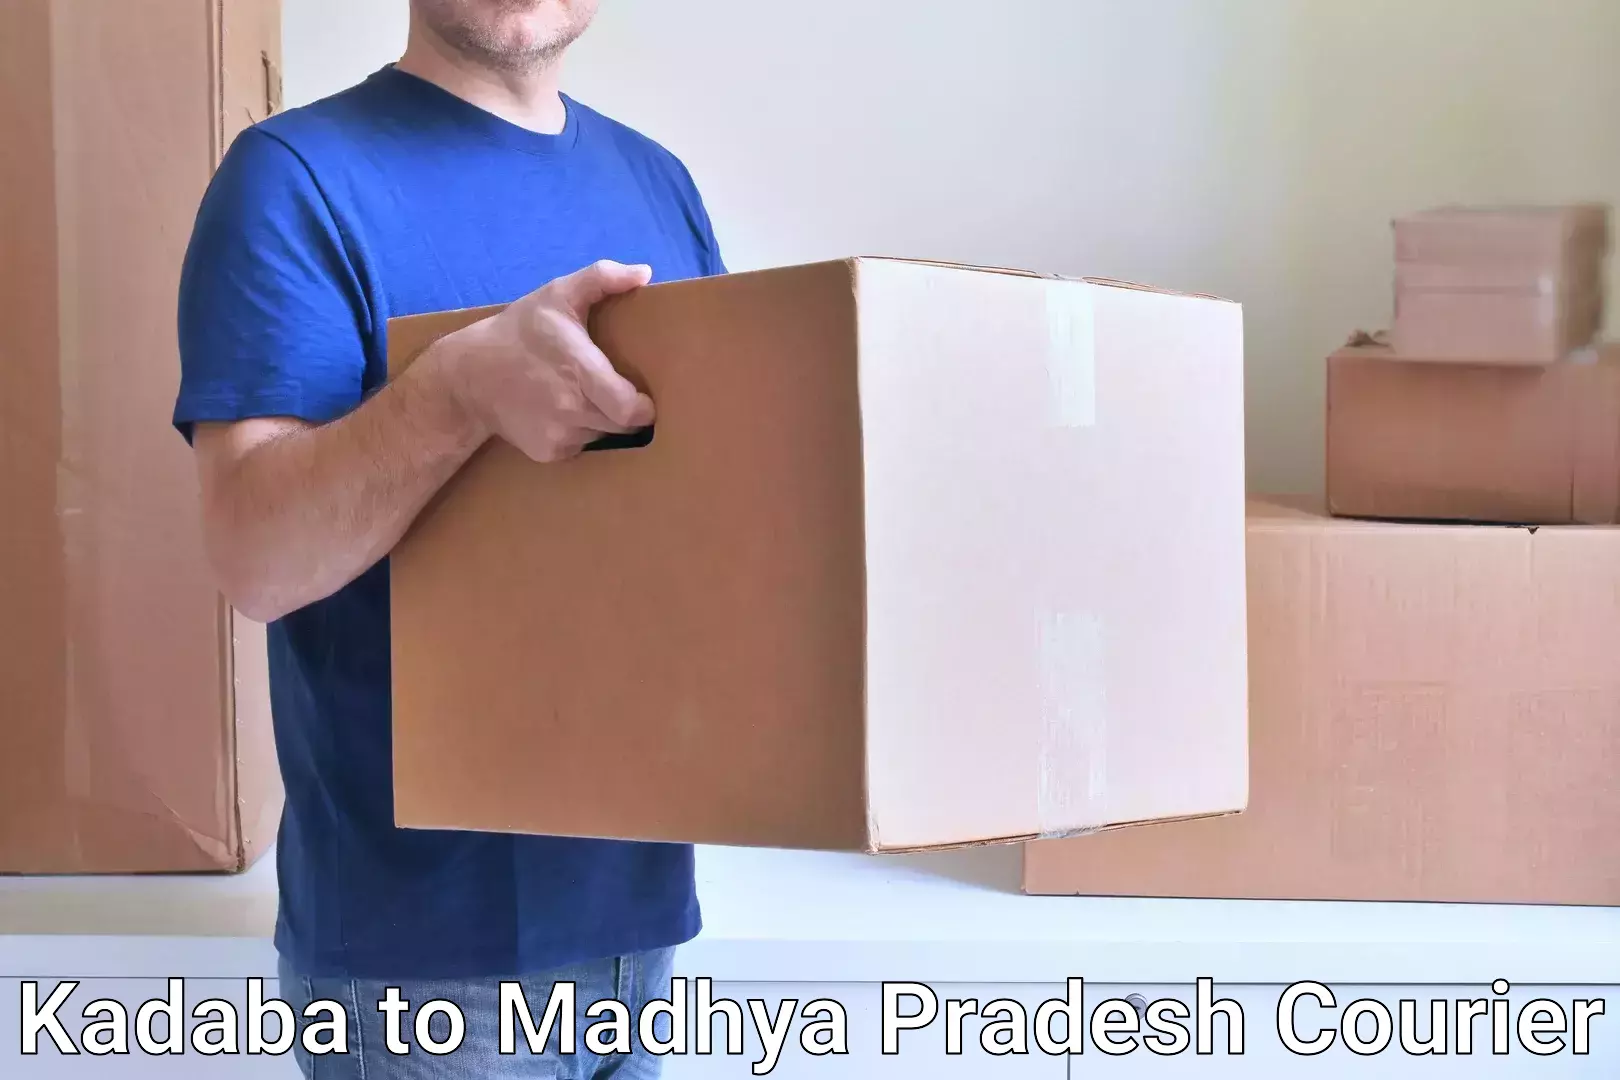 Efficient package consolidation Kadaba to Ujjain